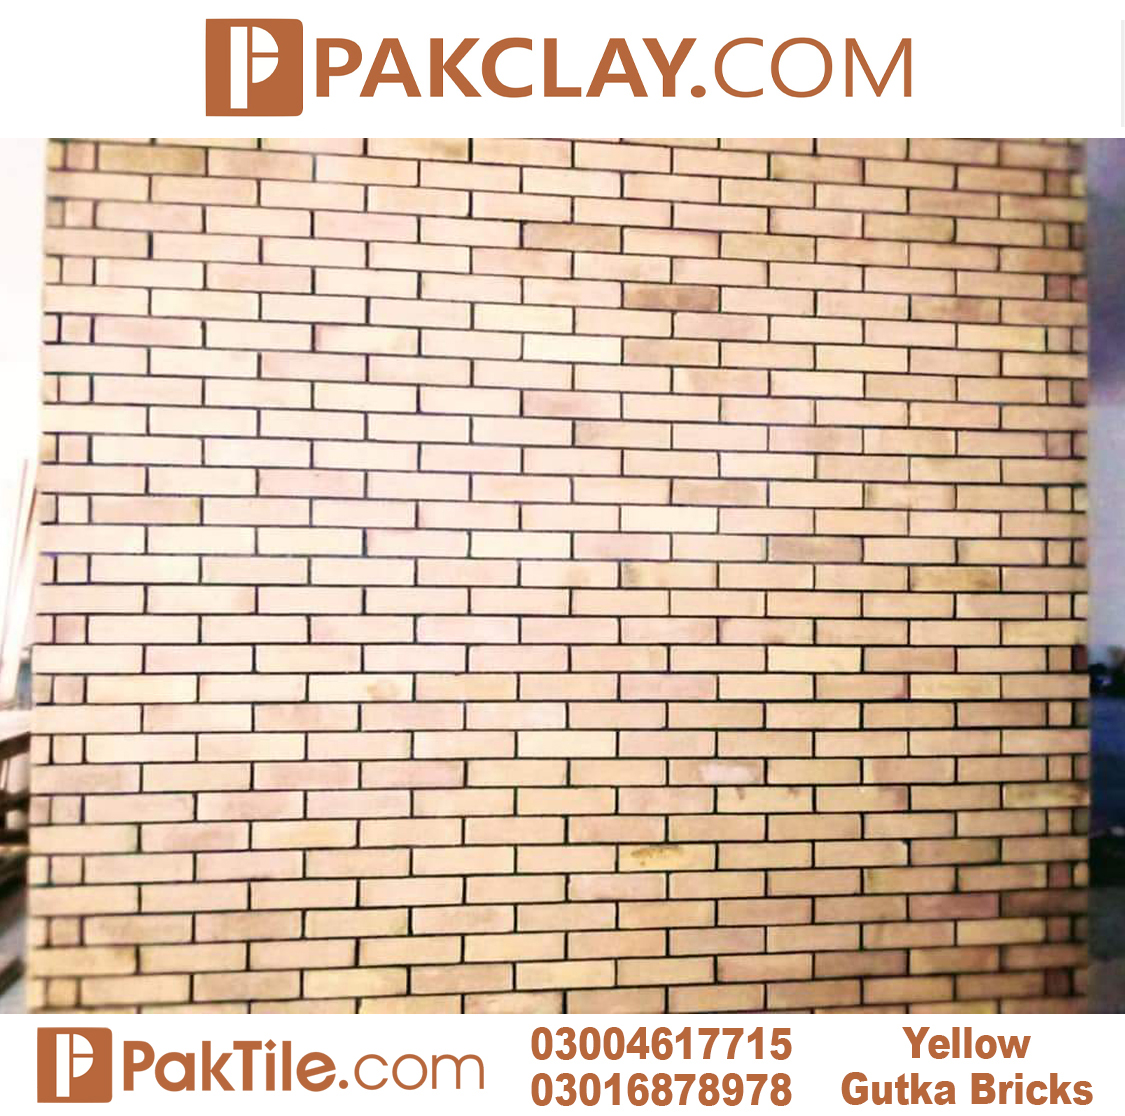 clay tiles lahore, clay tiles price in pakistan, terracotta tiles pakistan, clay roof tiles, clay roof tiles in pakistan, pak clay tiles, clay tiles karachi, 